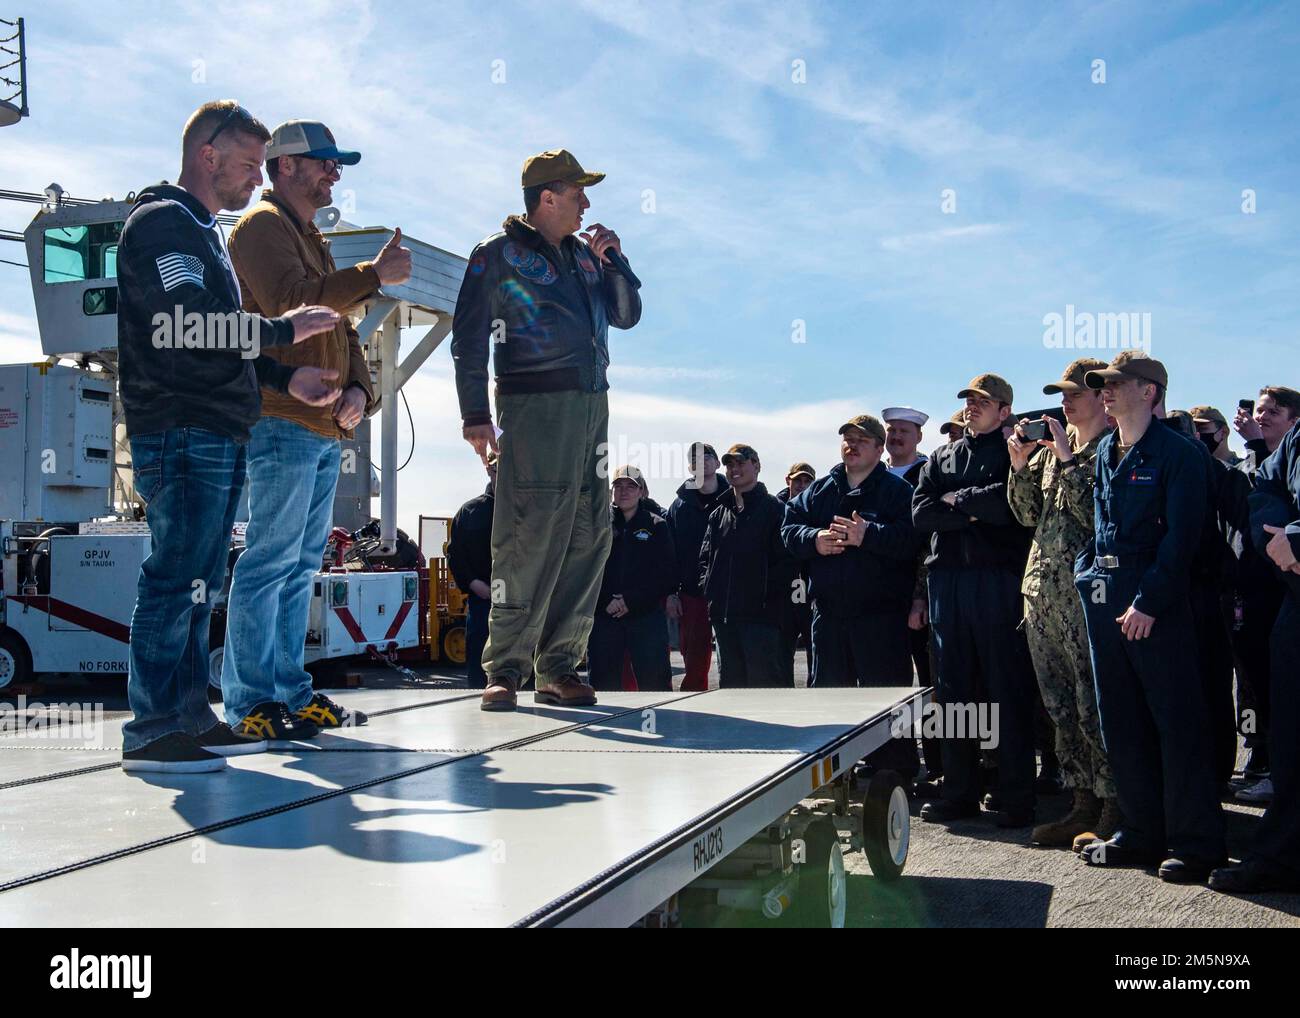 220329-N-OL632-1133 NAVAL STATION NORFOLK (March 29, 2022) Capt. Robert Aguilar, commanding officer of USS George H.W. Bush (CVN 77), addresses the crew with NASCAR Hall of Famer Dale Earnhardt Jr. and NASCAR Xfinity Series driver Justin Allgaier during a visit to the ship, March 29, 2022. George H.W. Bush provides the national command authority flexible, tailorable war fighting capability as the flagship of the carrier strike group which maintains maritime stability and security in order to ensure access, deter aggression and defend U.S., allied and partner interests. Stock Photo